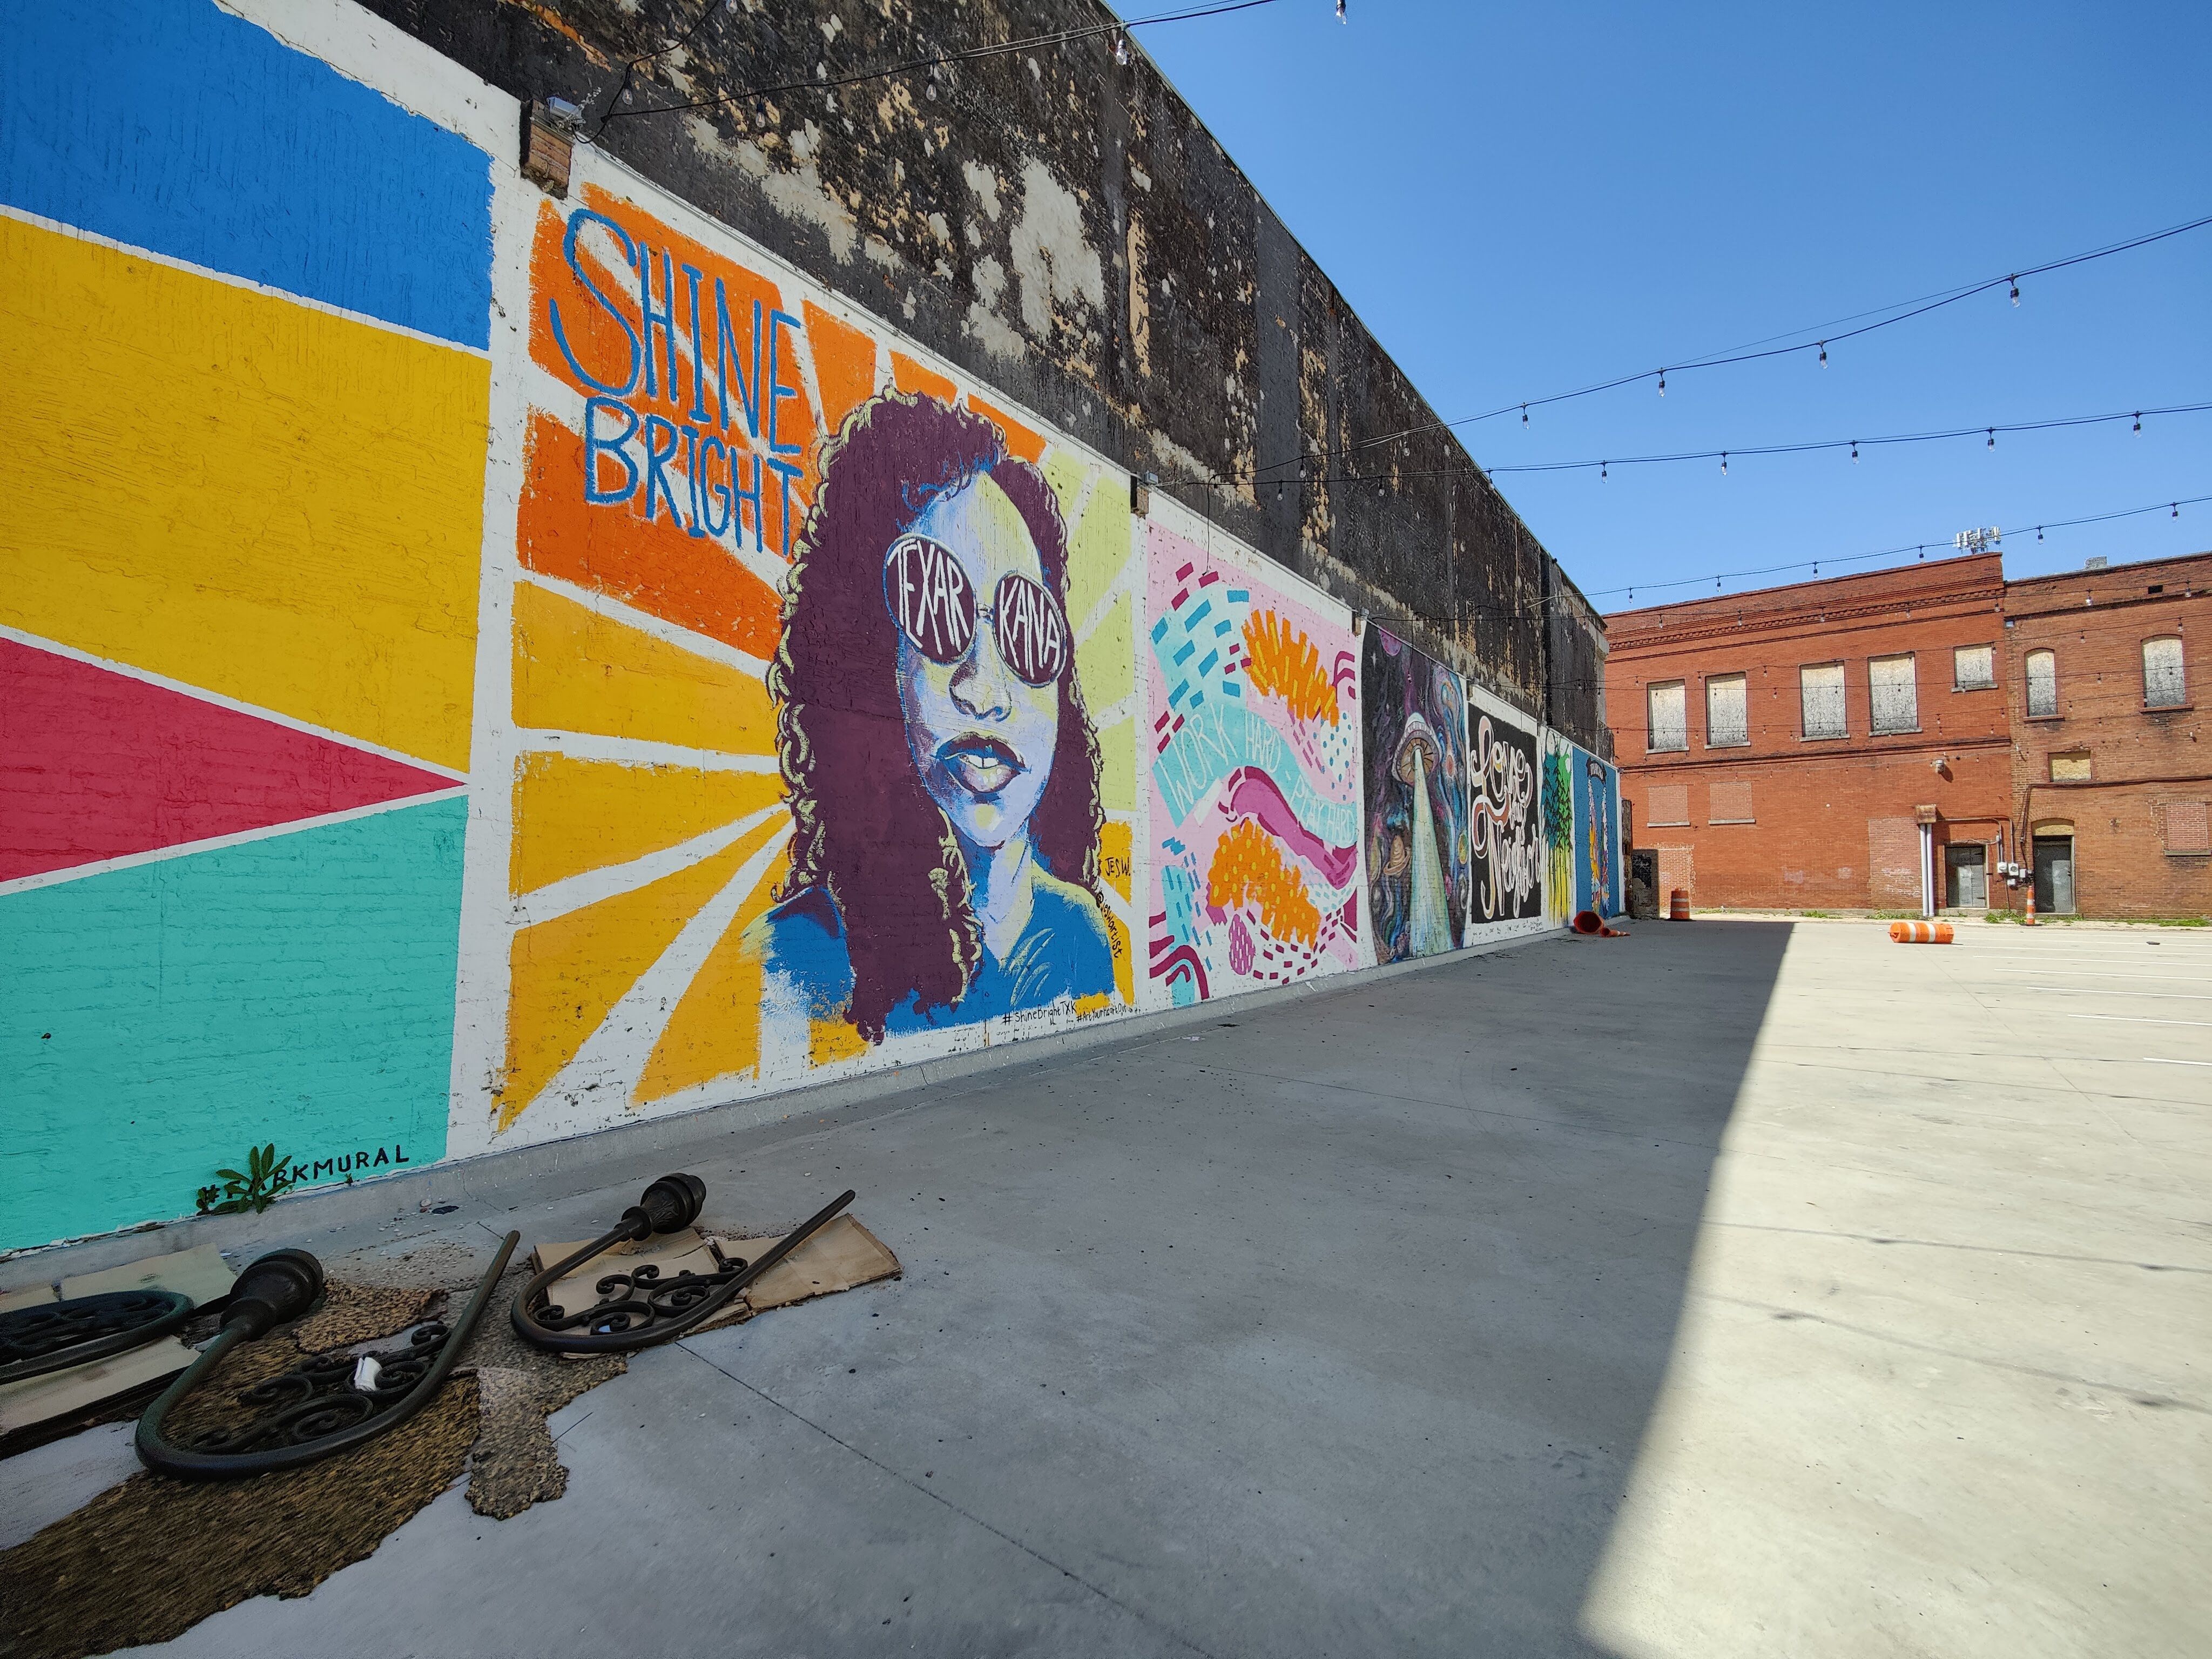 OnePlus 9 Pro Camera Sample: A mural shot with the ultra-wide lens